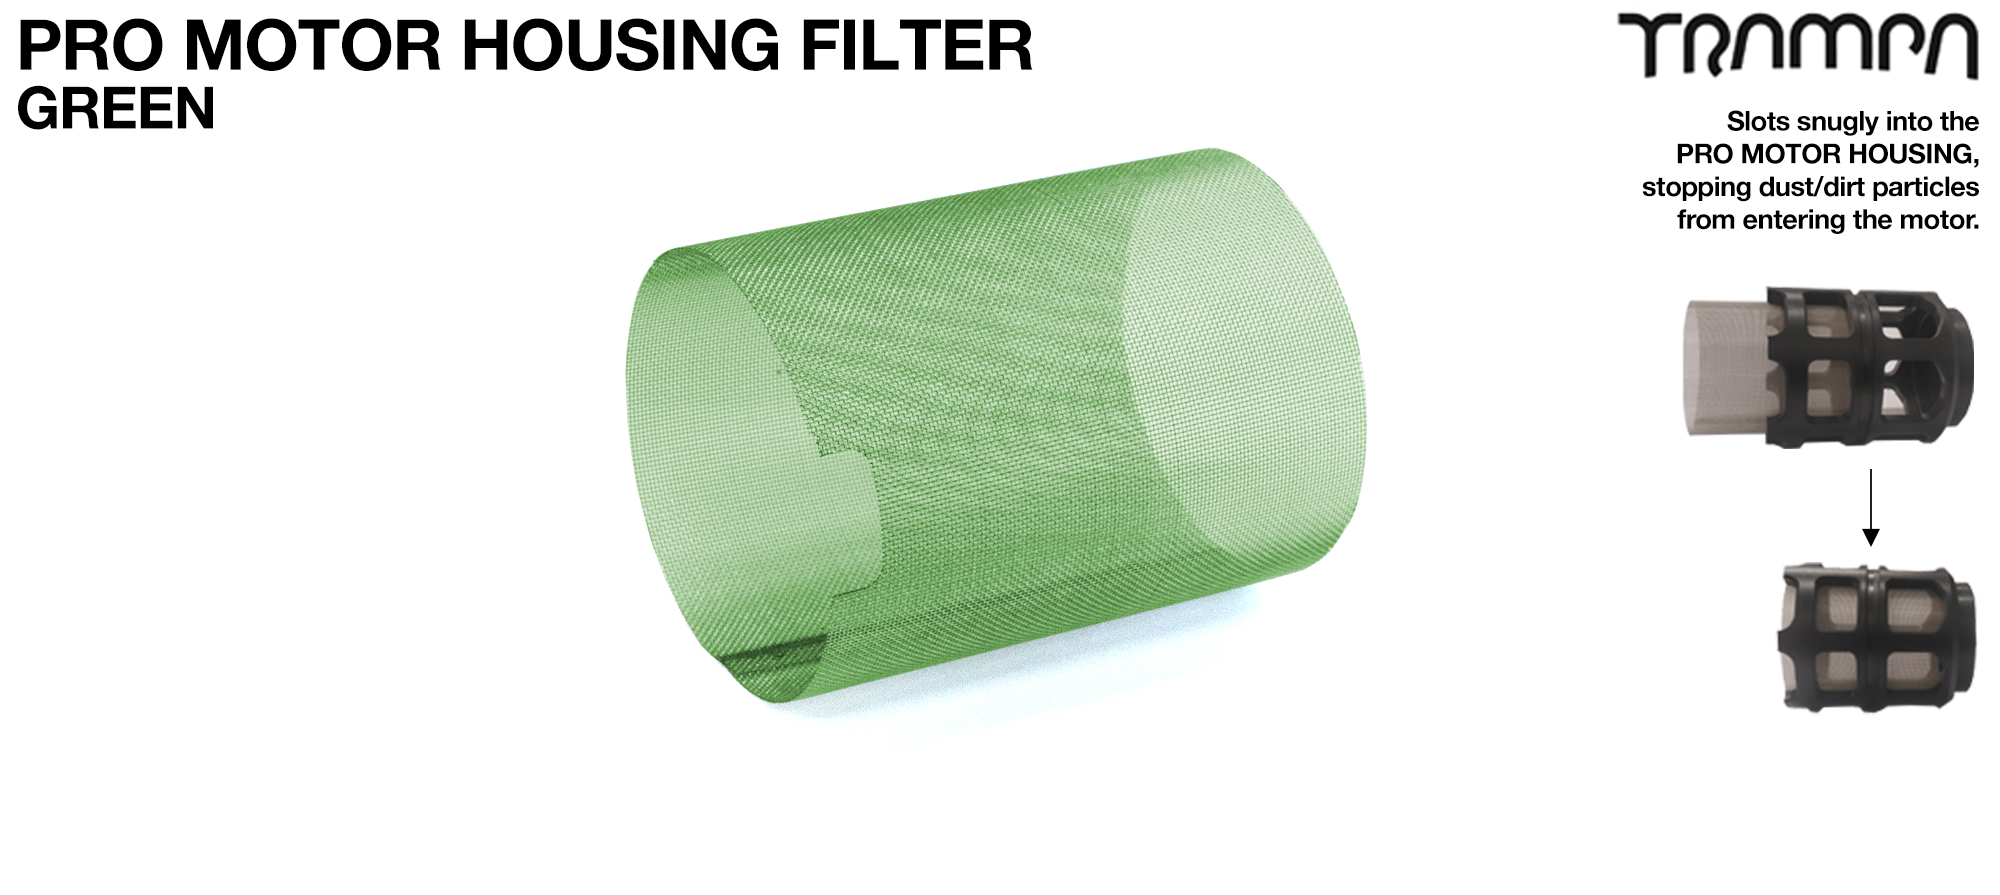 MkII FULL Motor Protection Cover & MESH FILTER - GREEN